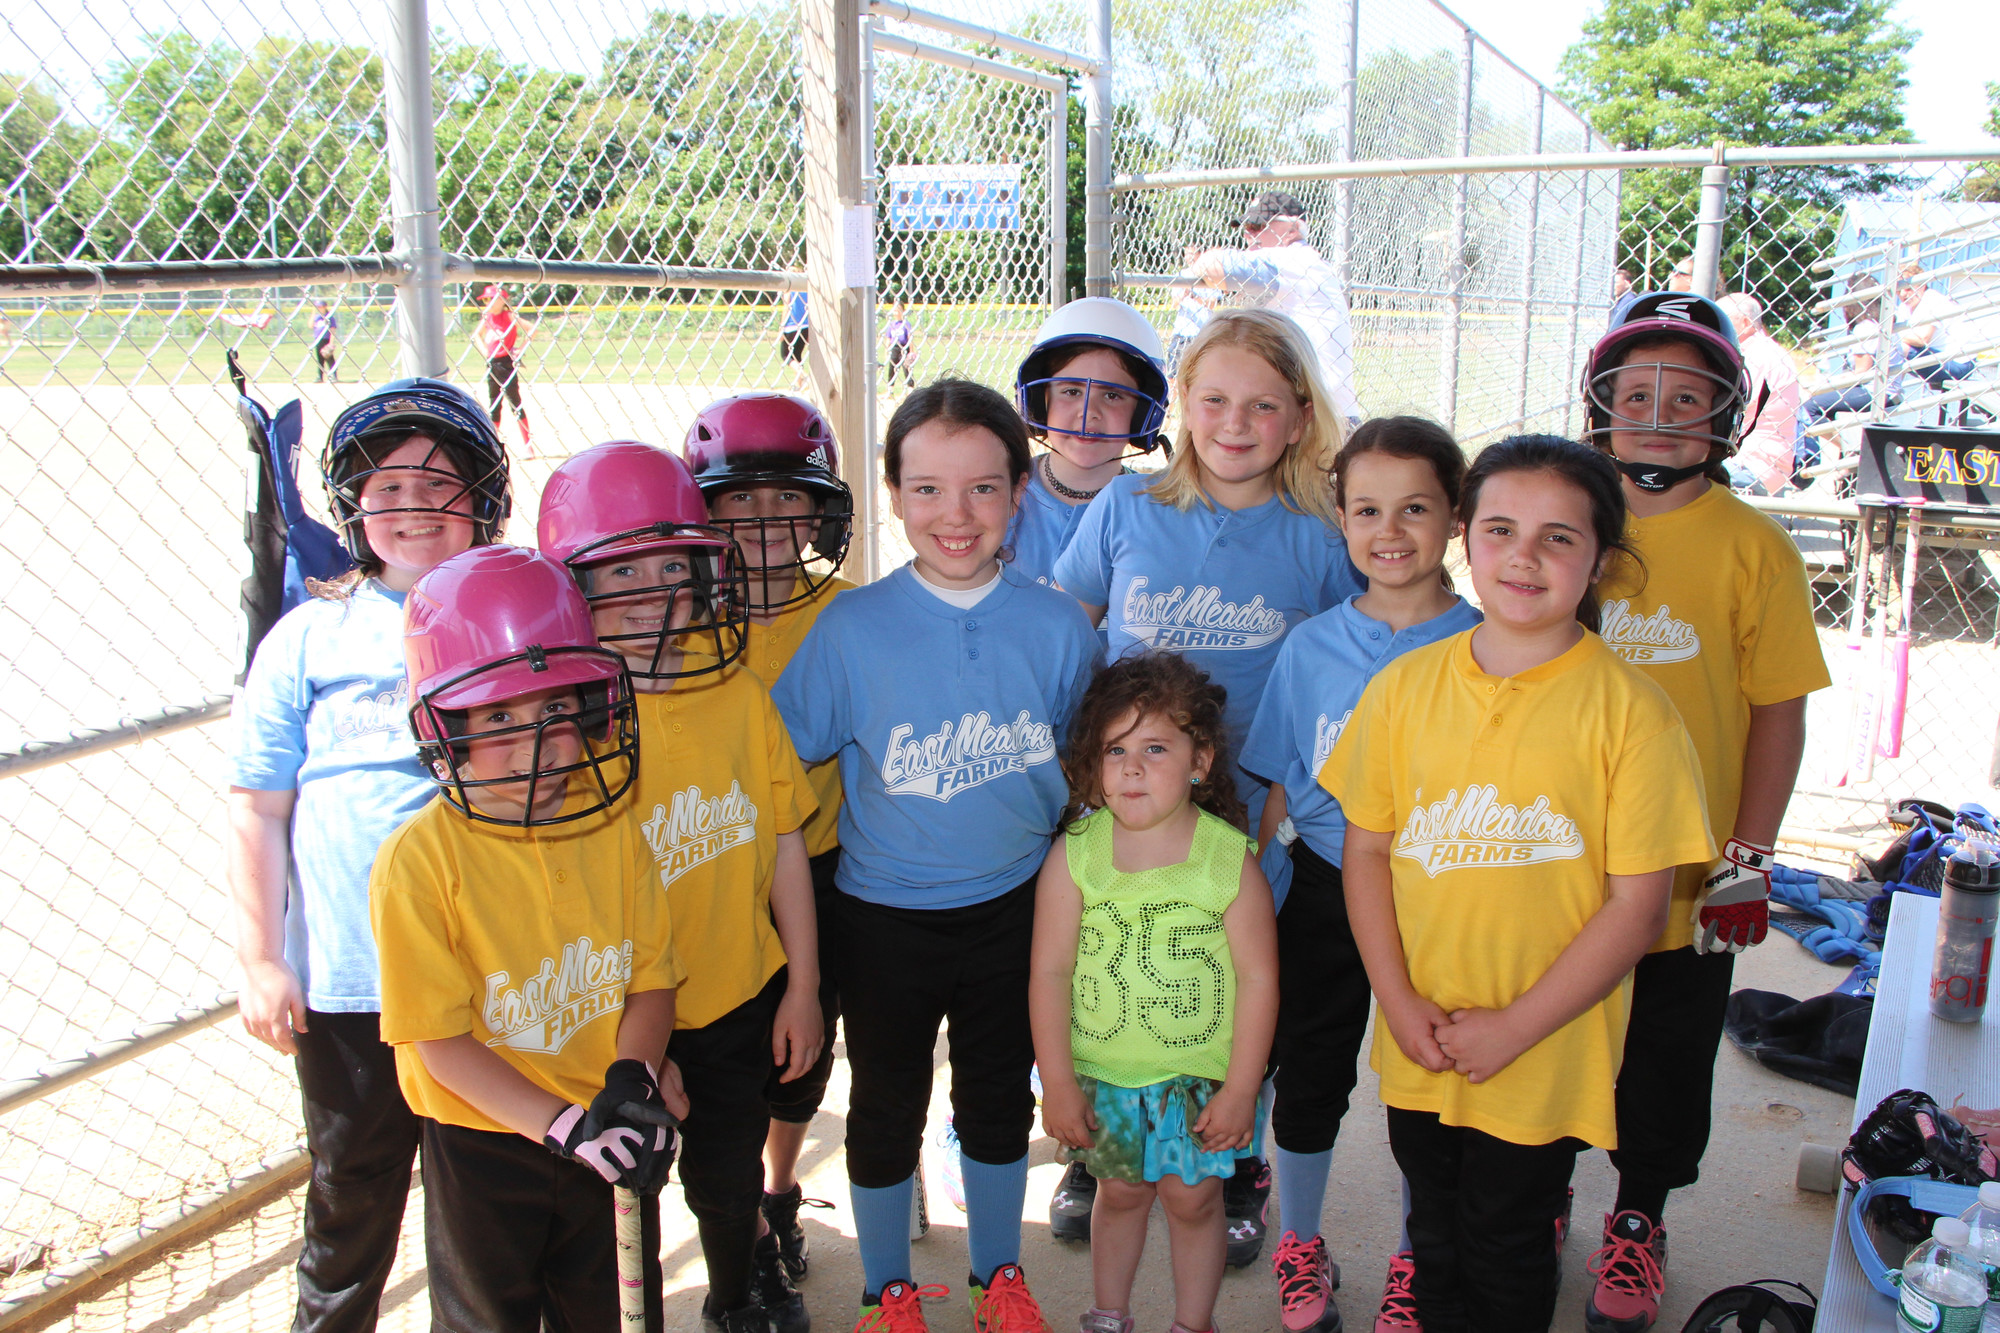 The 8- and 9-year-olds from the girl’s Farm League enjoyed a day of softball.